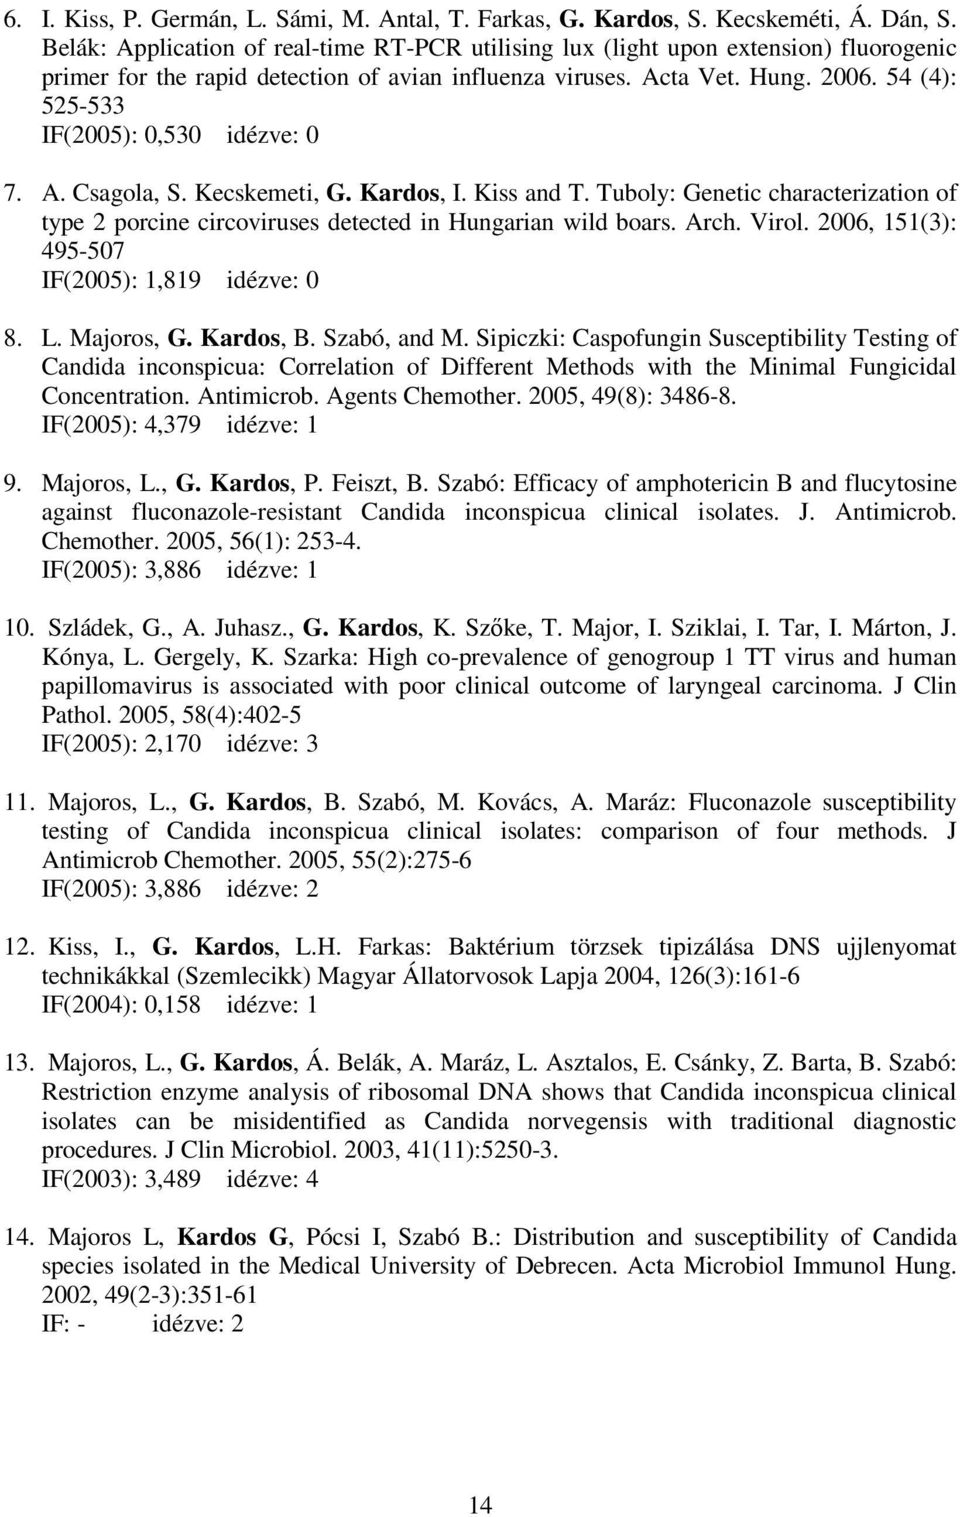 54 (4): 525-533 IF(2005): 0,530 idézve: 0 7. A. Csagola, S. Kecskemeti, G. Kardos, I. Kiss and T. Tuboly: Genetic characterization of type 2 porcine circoviruses detected in Hungarian wild boars.